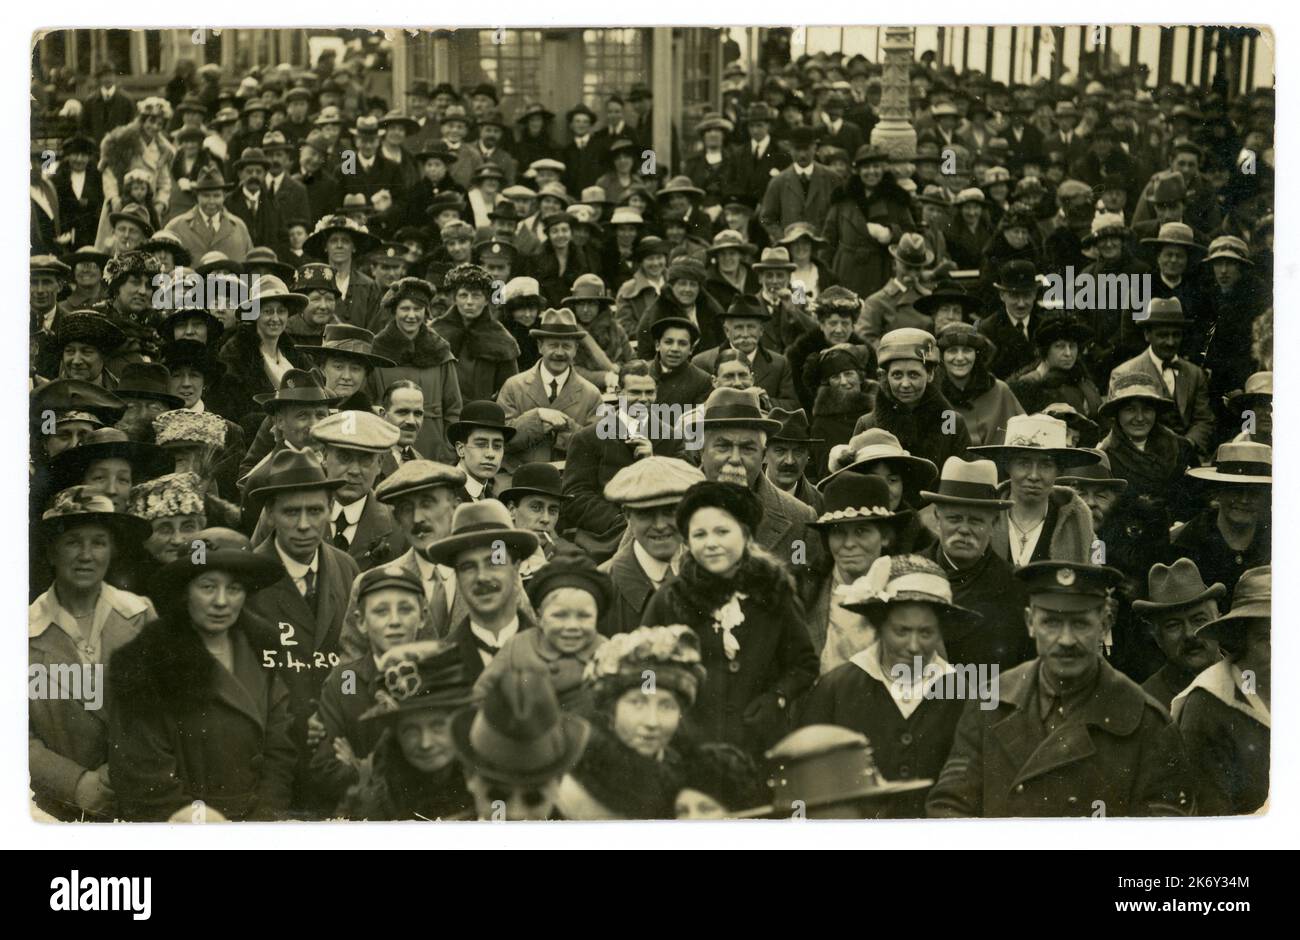 Original 1920's era working class holiday crowd dated 5  April 1920, British seaside resort, lots of characters and fashions, including flat caps and homburg hats. U.K. Stock Photo